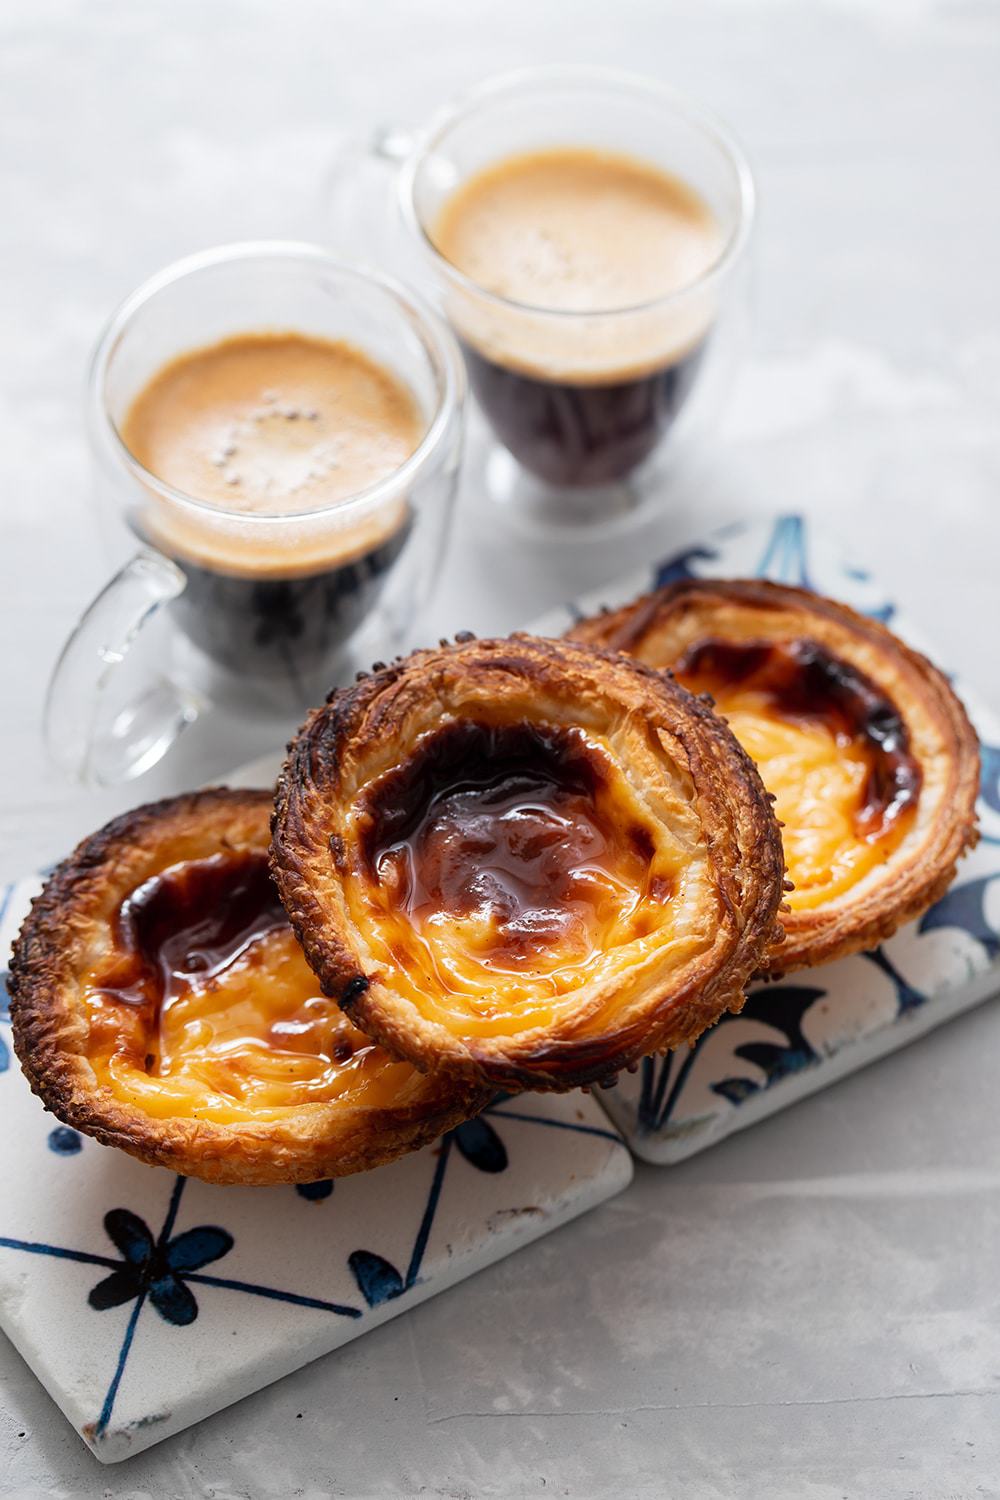 The Perfect Pastéis De Nata Should Look And Taste Like This | Cooking Clue